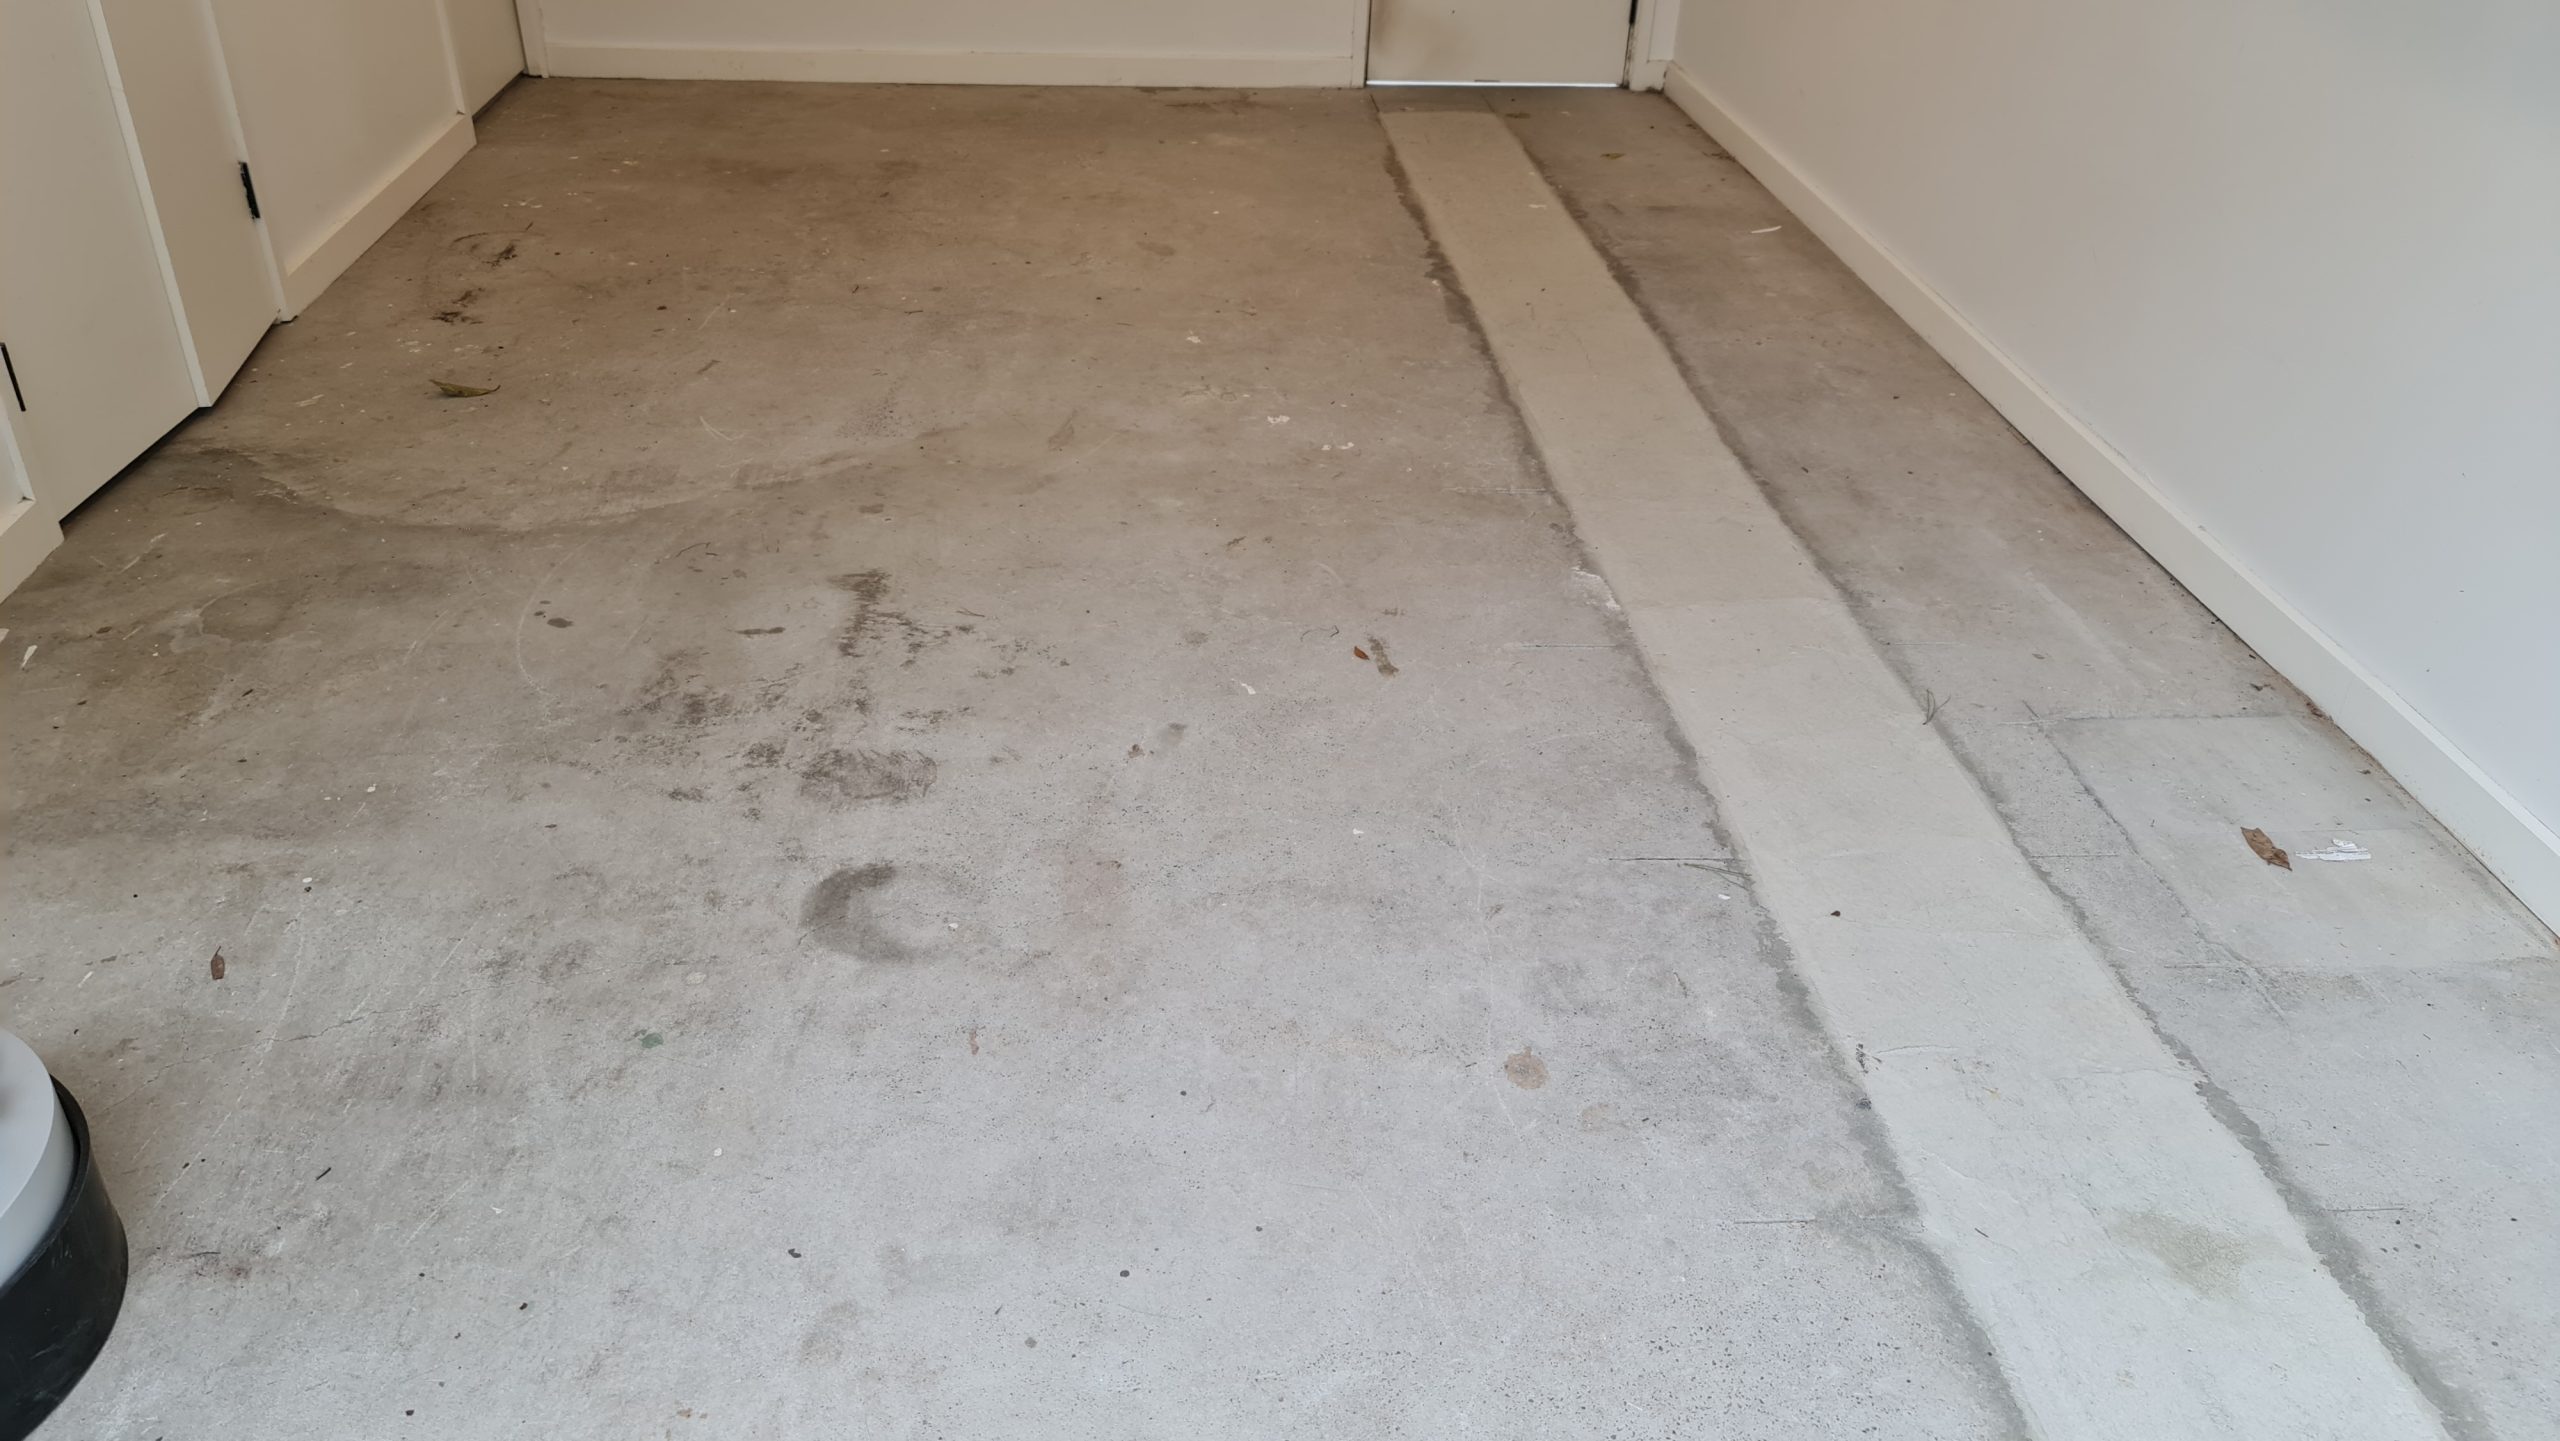 Epoxy stone flake floor for home/residential garage - bfore